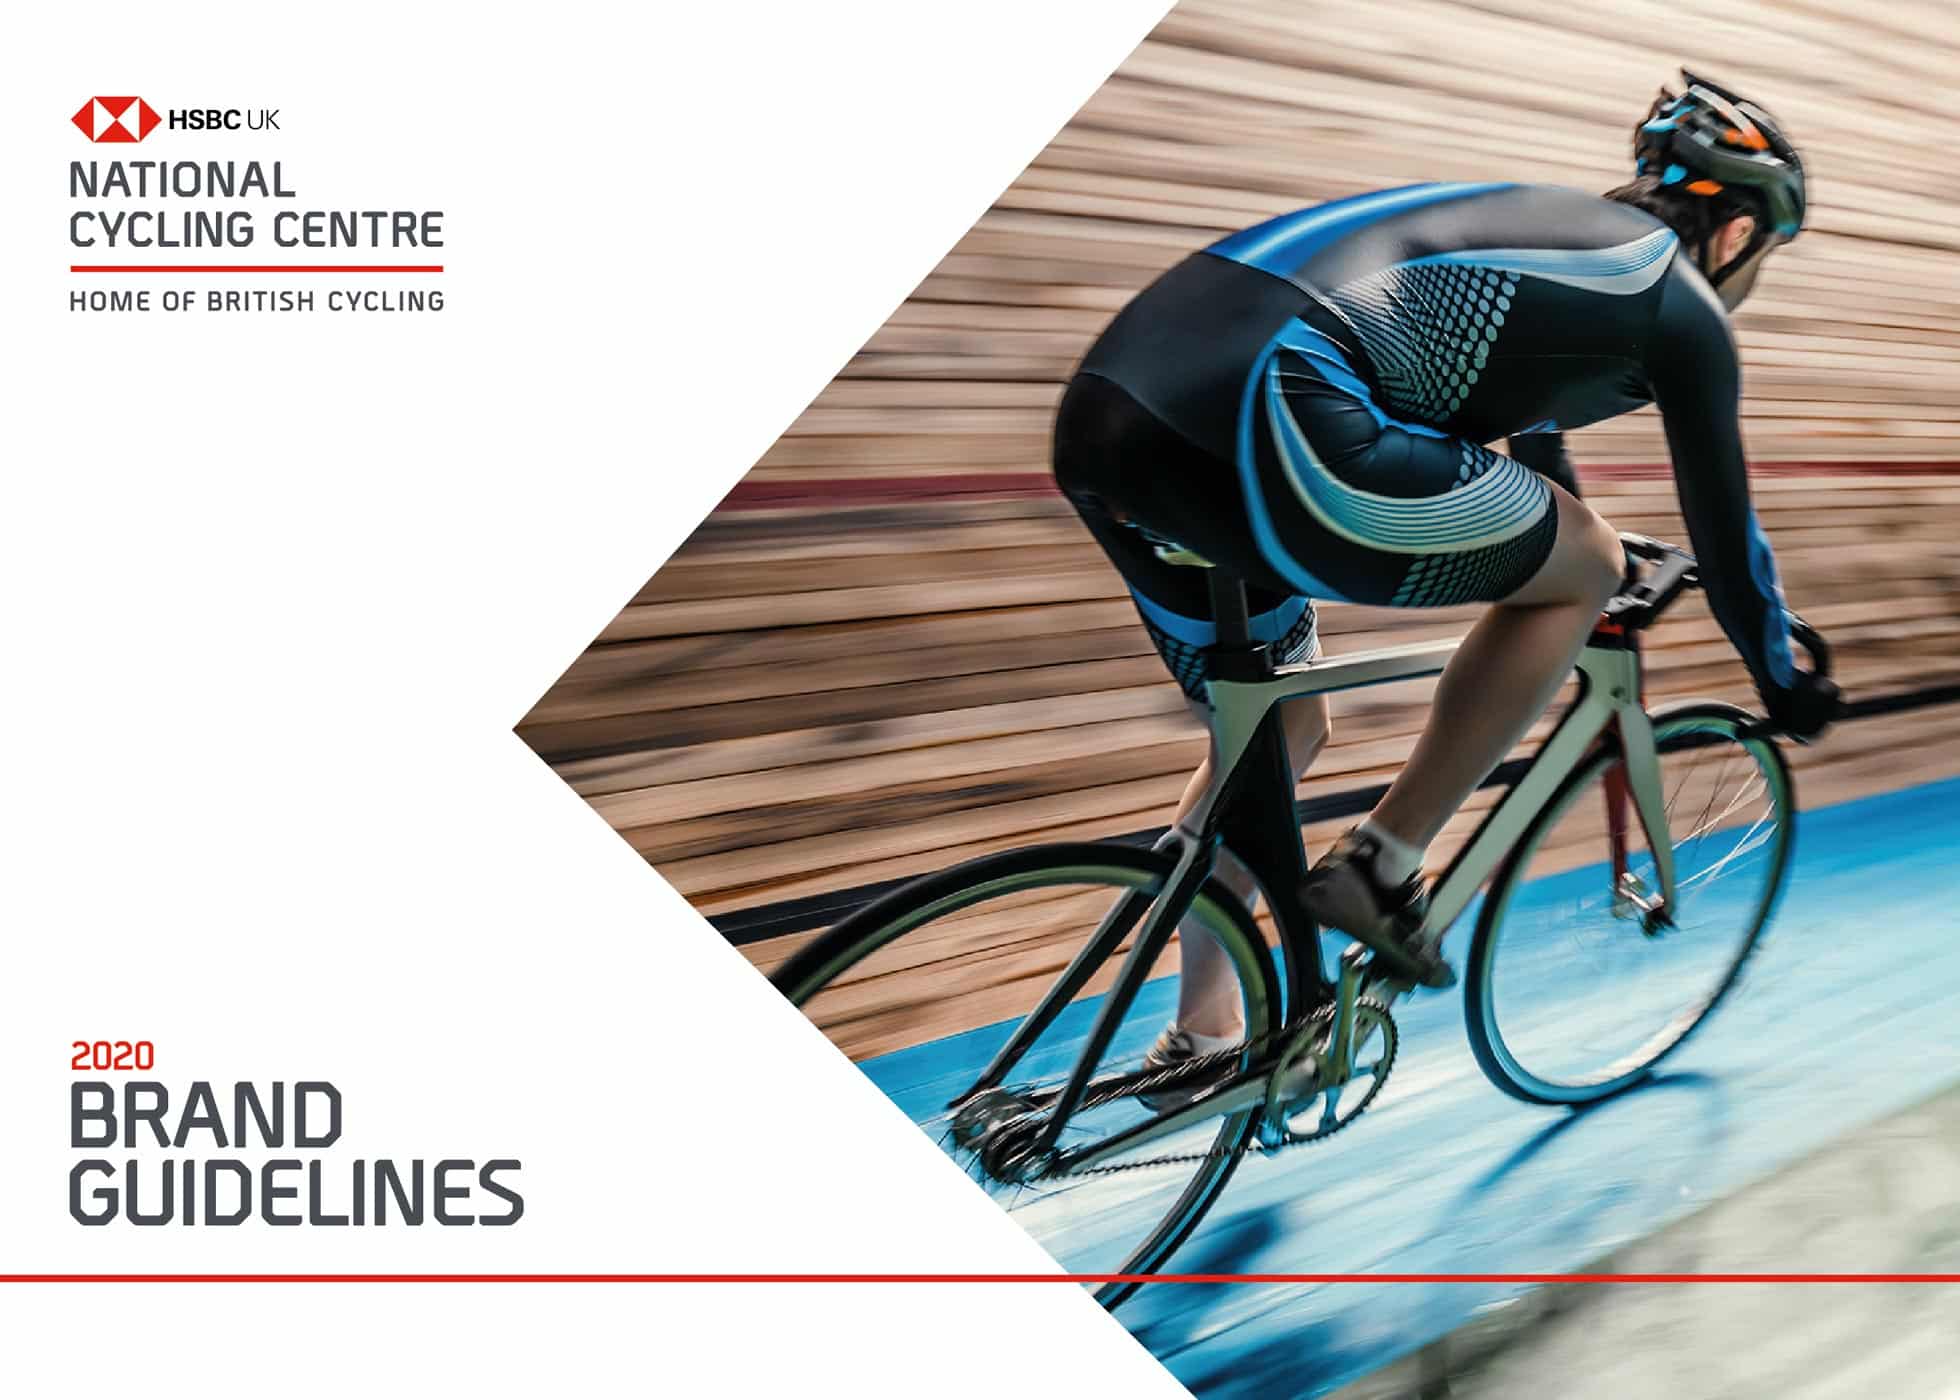 A Close At Branded Guidelines HSBC National Cycling Centre Brand Guidelines